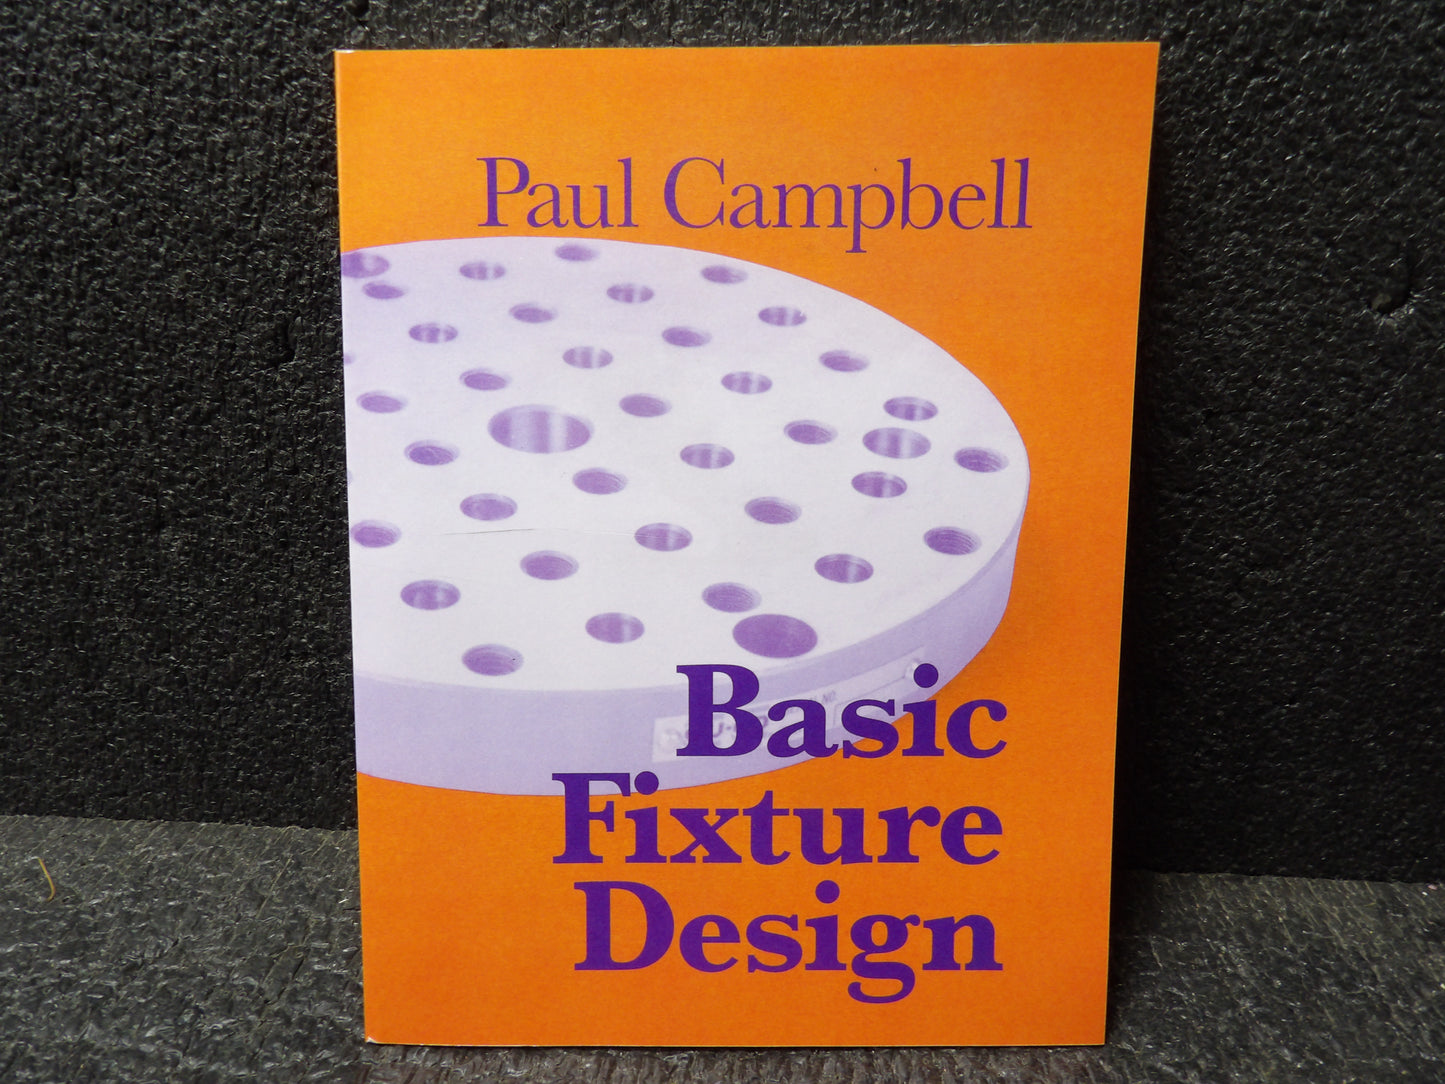 Basic Fixture Design by Paul Campbell (CR00828-WTA23)